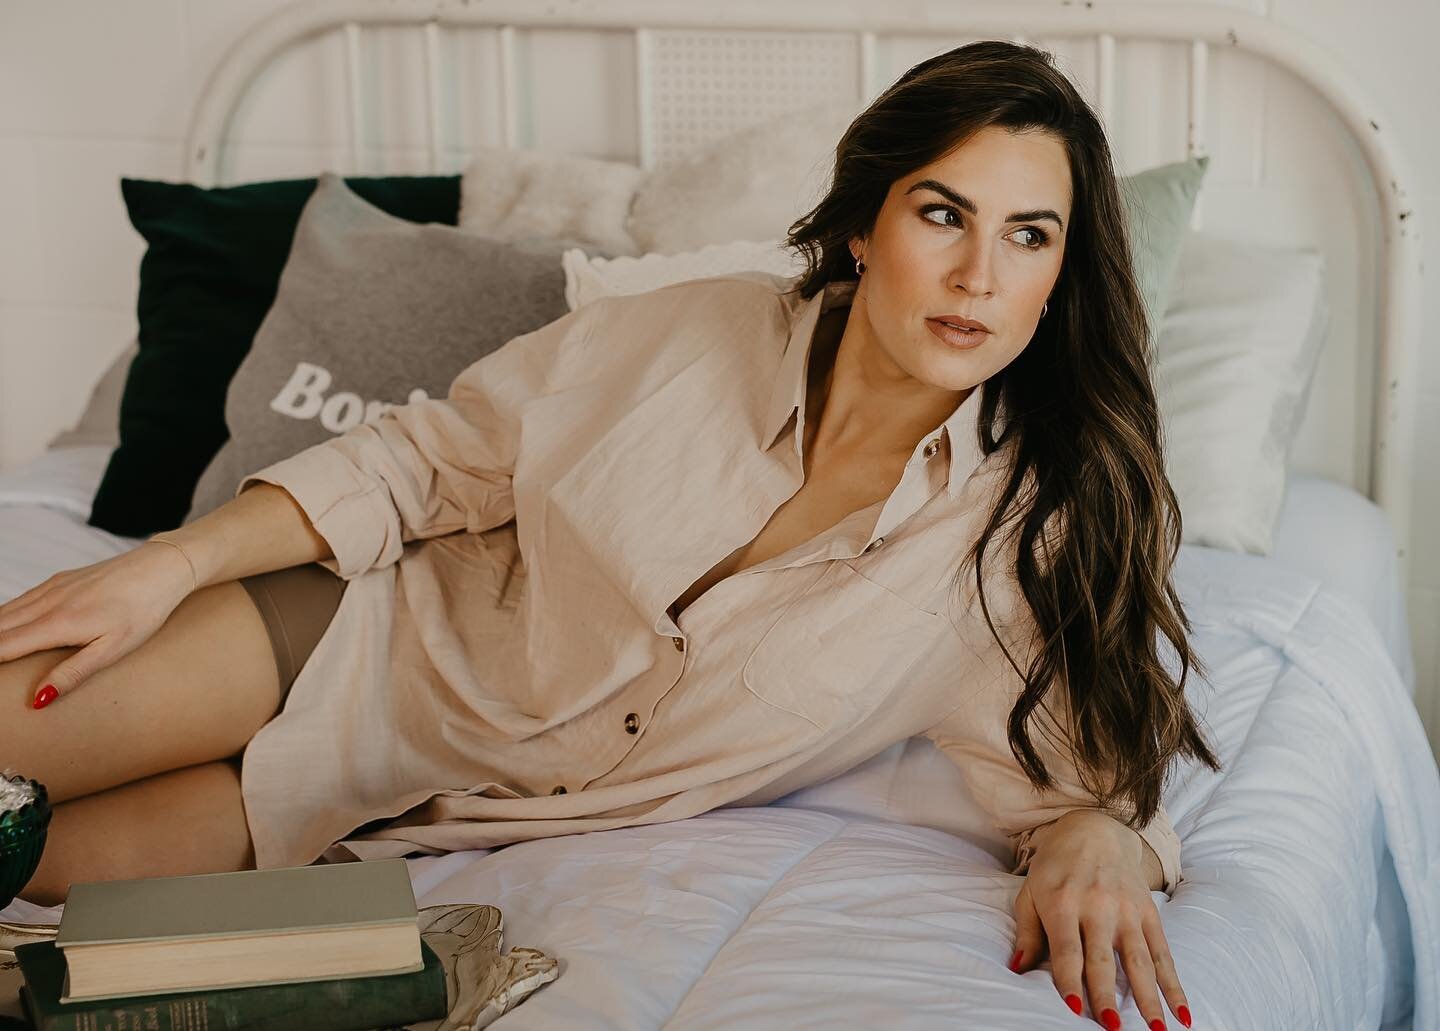 It&rsquo;s one of those Monday&rsquo;s where snuggling indoors, drinking coffee, and reading a book is the best therapy in the world. This photoshoot was a dream, and can&rsquo;t wait for future collaborations like this 🤍

Planning @orangetrunk 
Pho